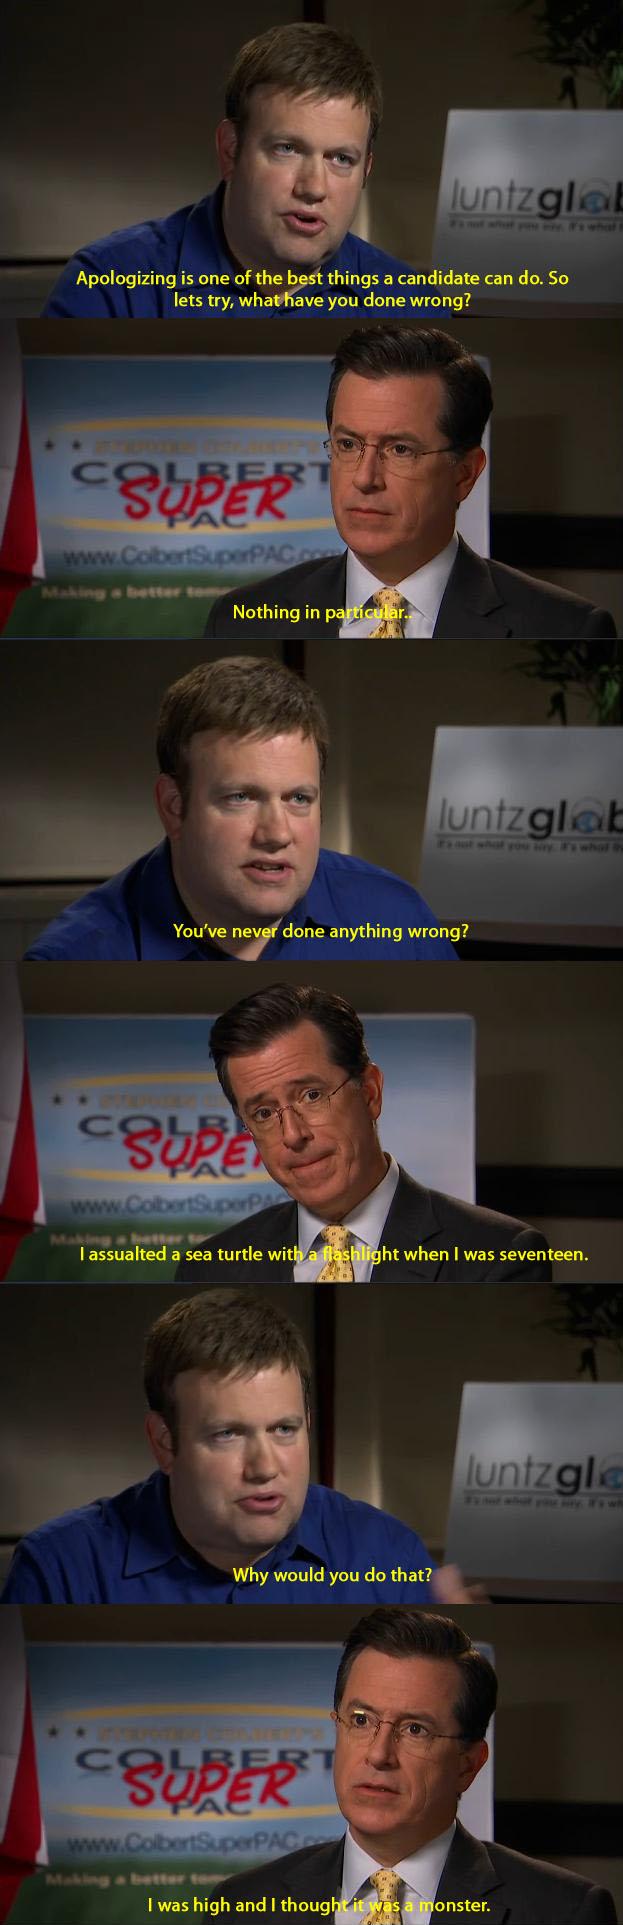 I would go gay for Colbert.